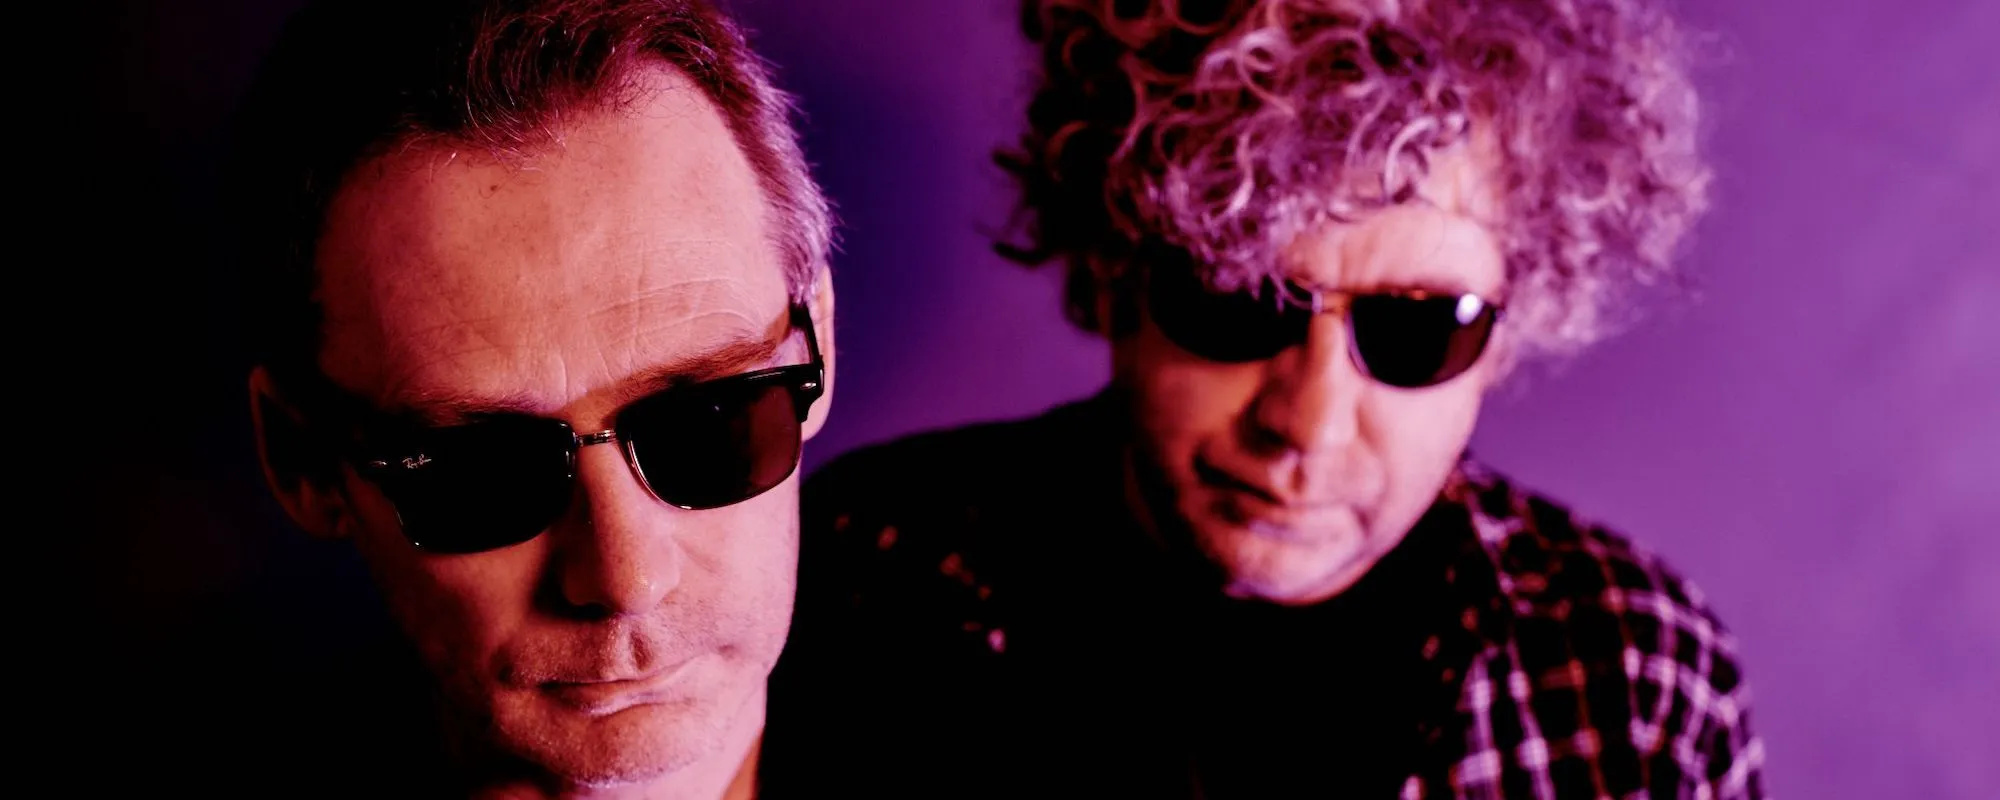 The Unreligious Story Behind the Band Name The Jesus and Mary Chain